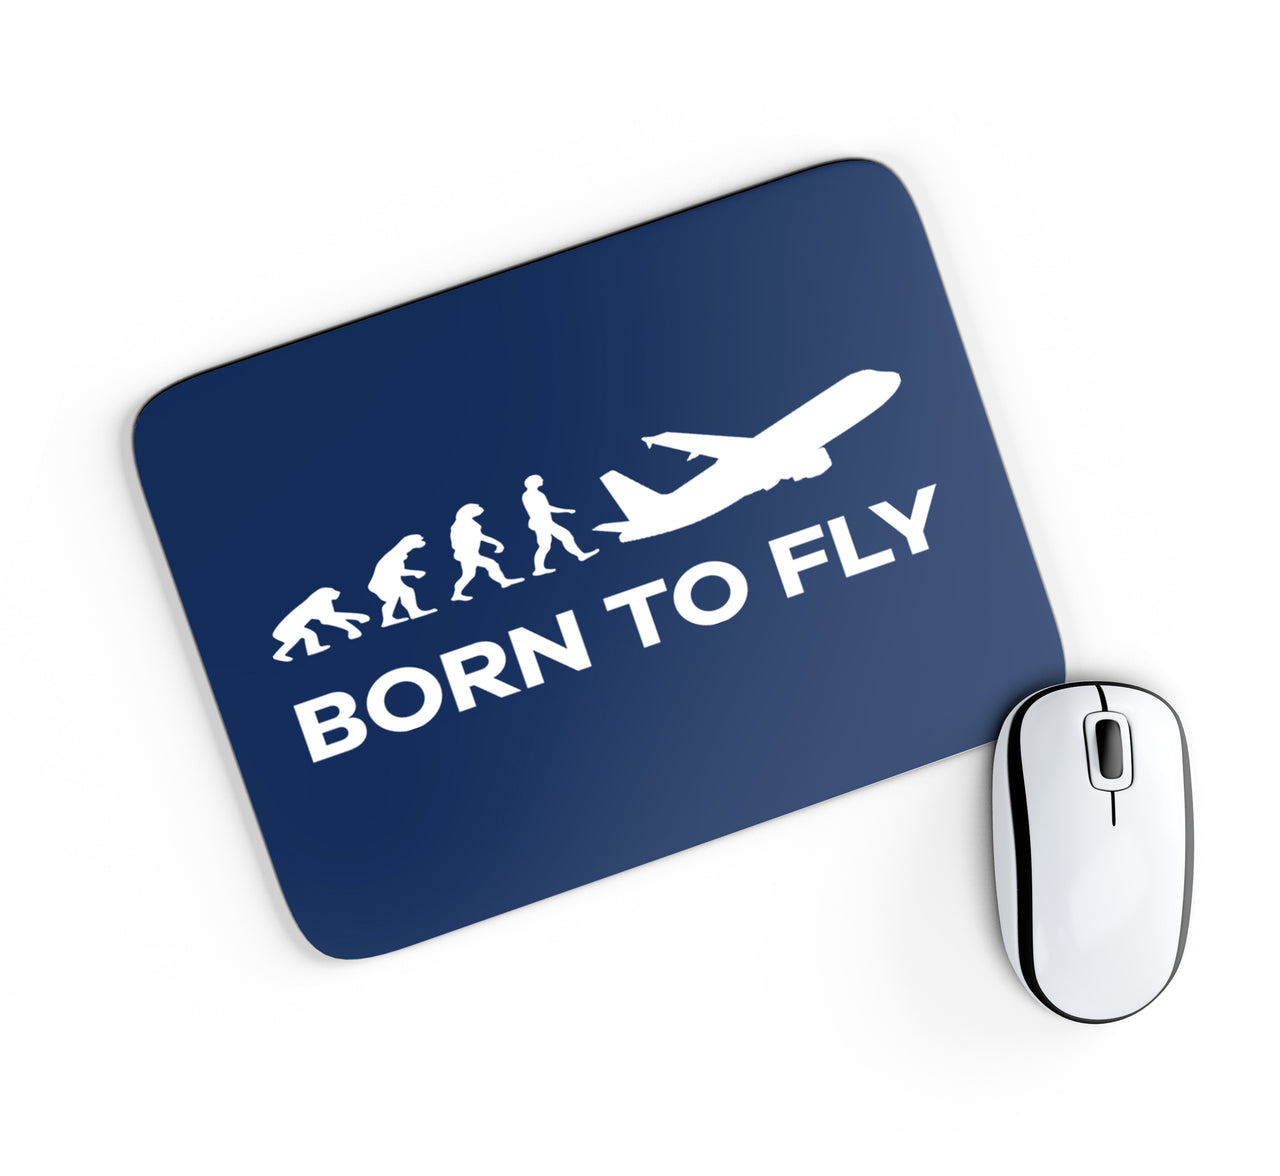 Born To Fly Designed Mouse Pads